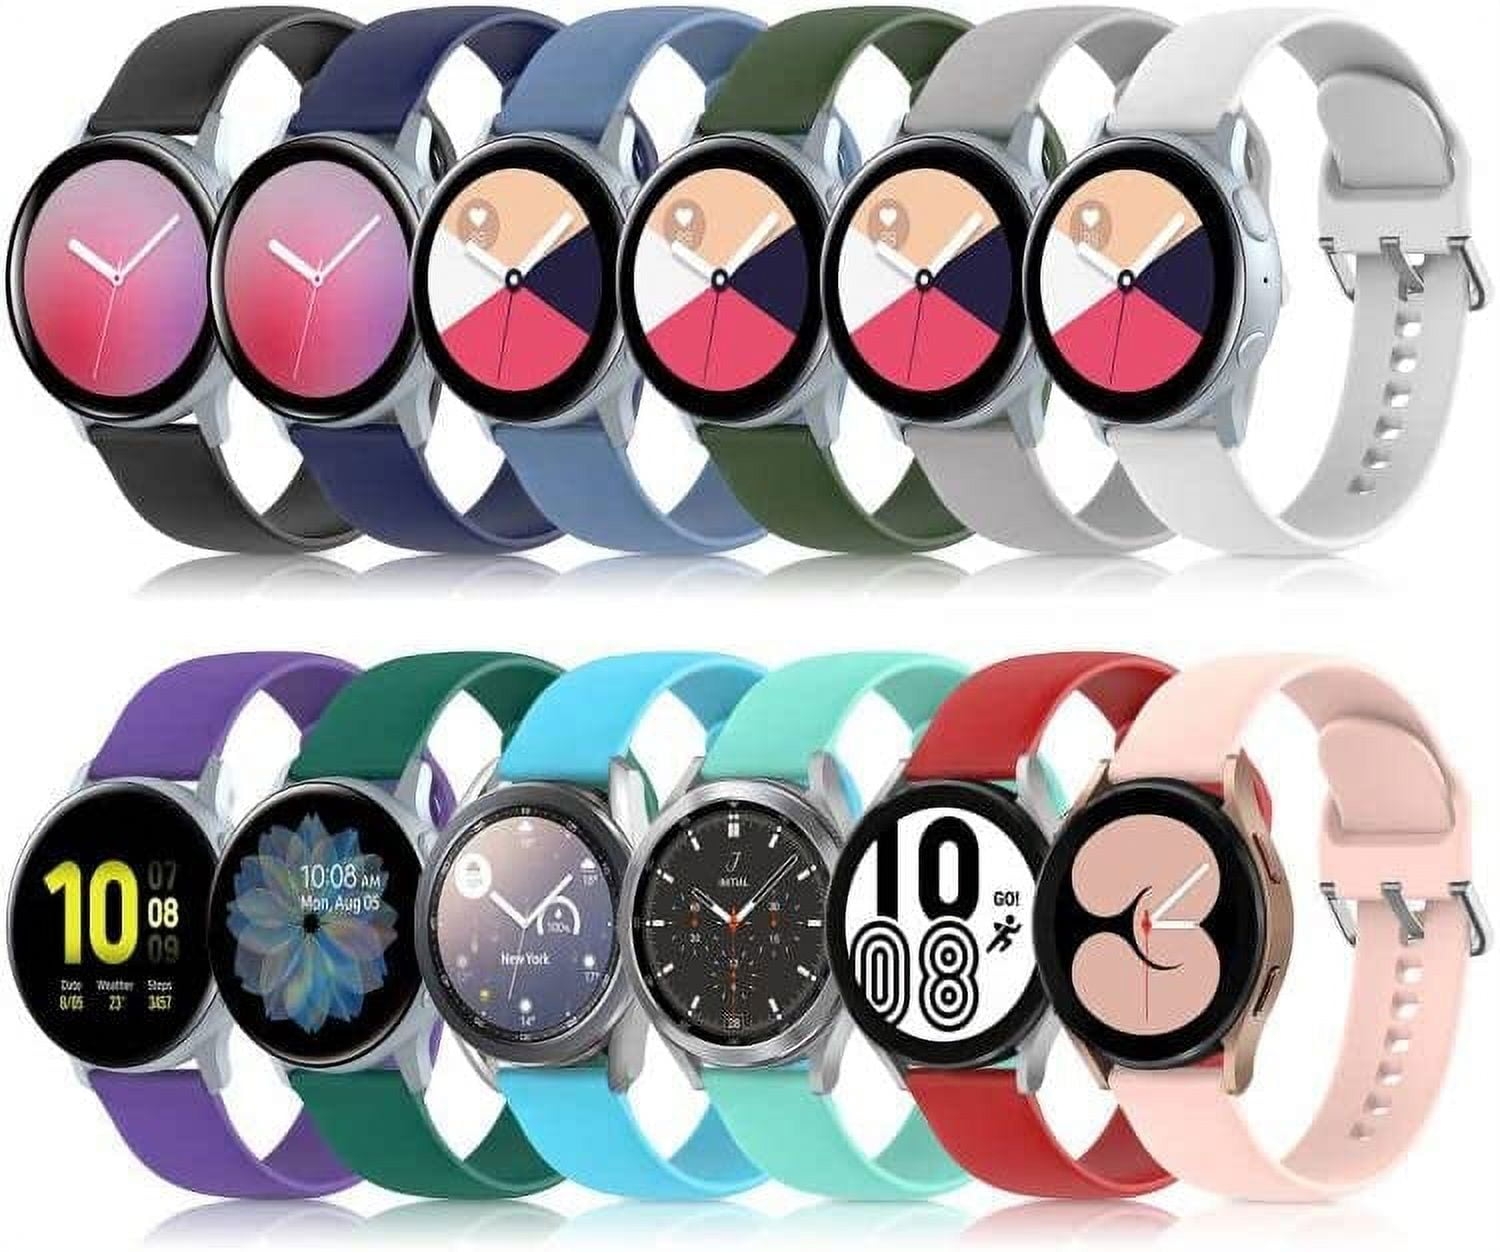  Obligatoryy Compatible with galaxy Active 2 Watch Bands 44mm  40mm Silicone Galaxy Watch 42mm Band 30mm Watch Band Non-Fading waterproof  Breathable Replacement Band : Cell Phones & Accessories